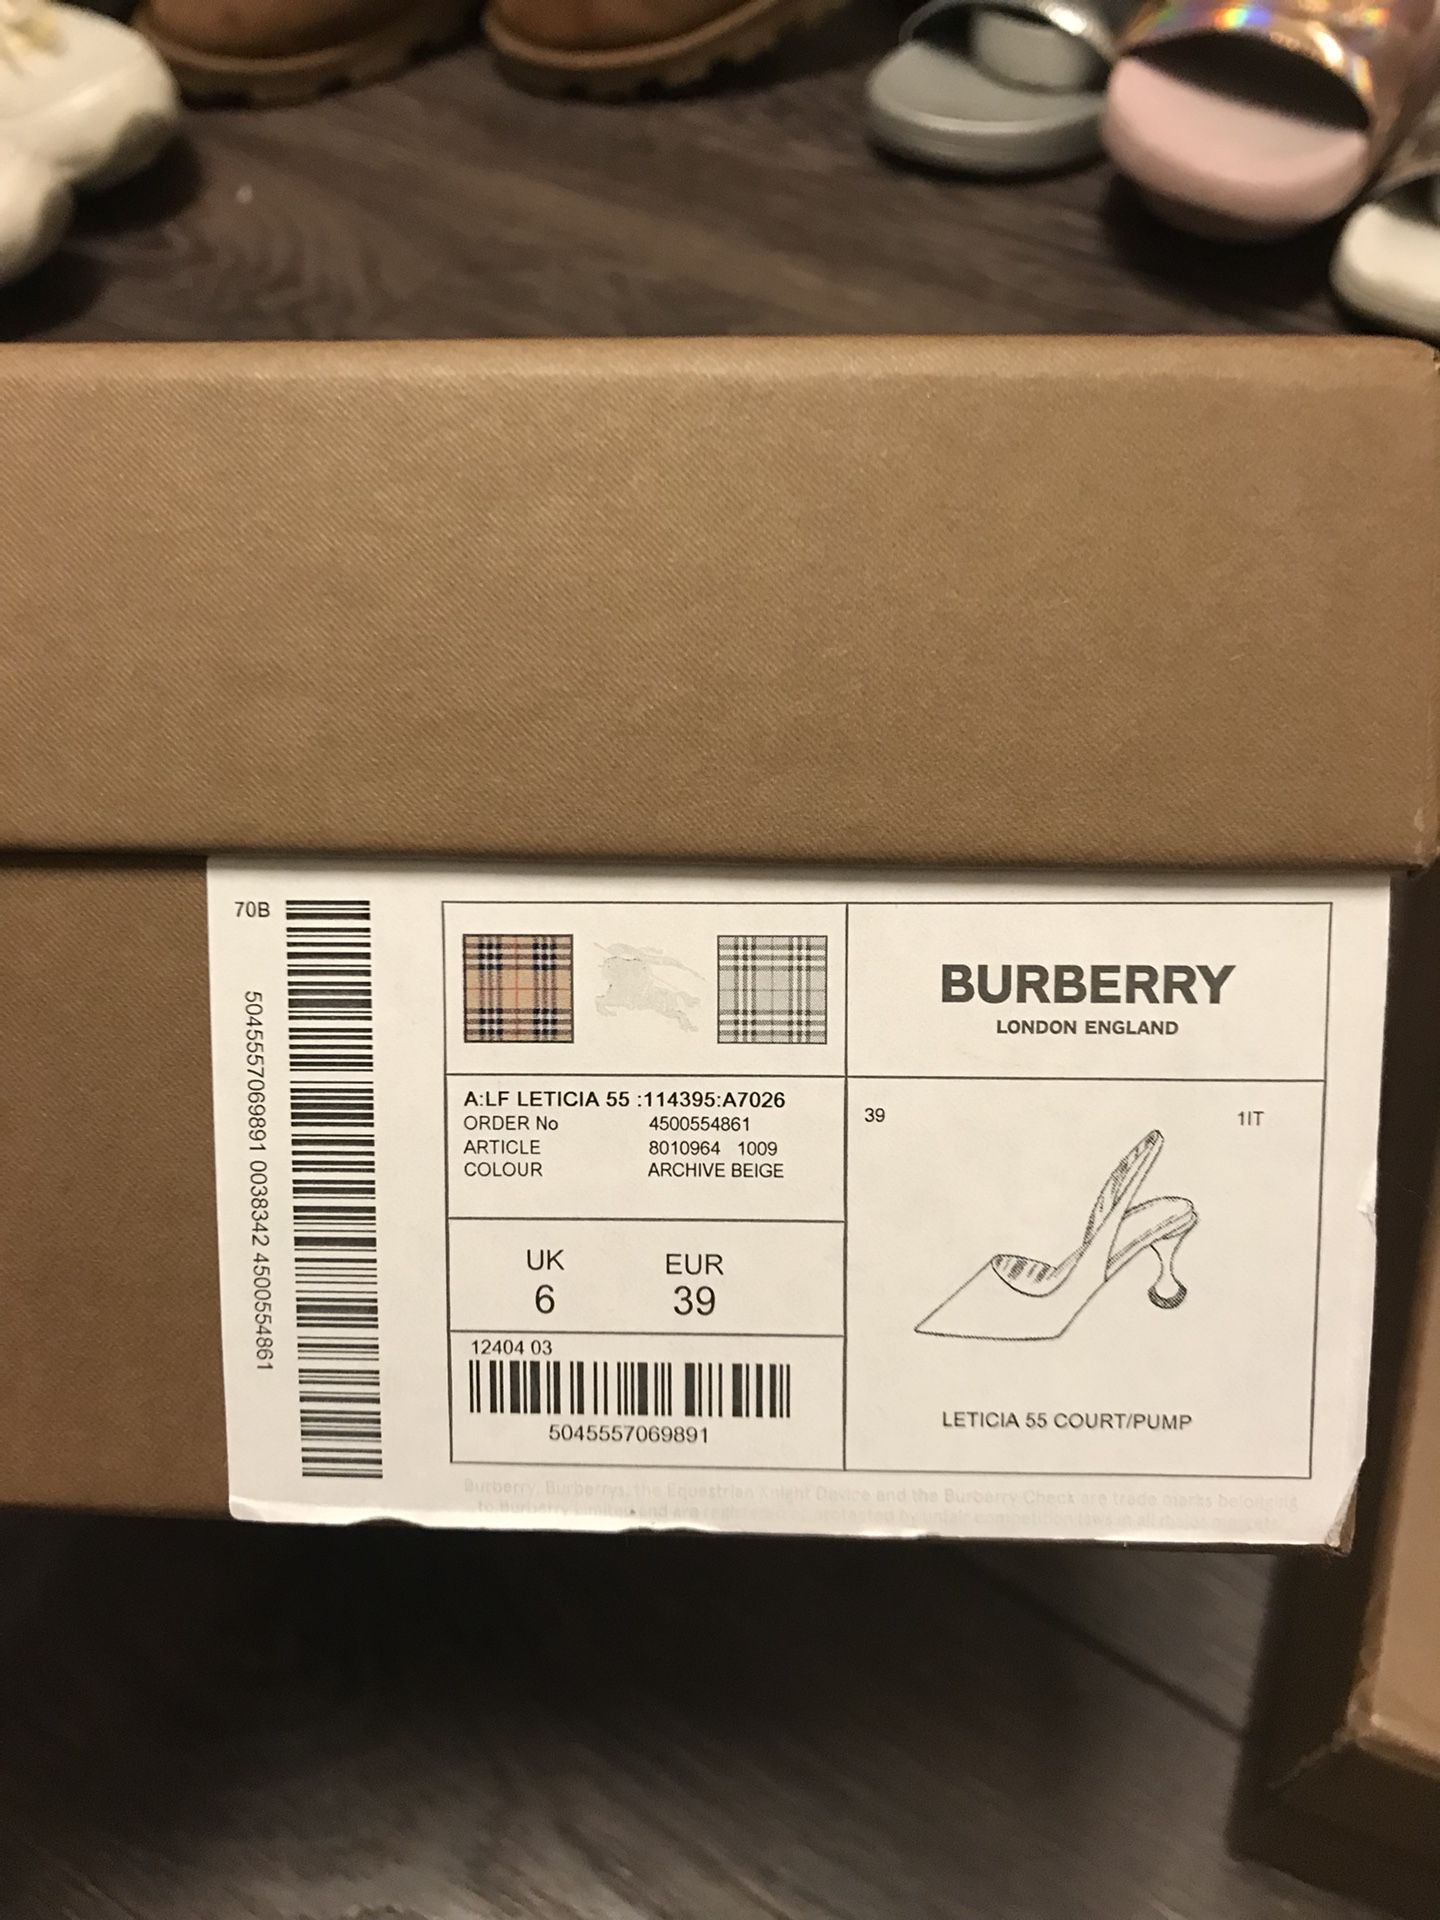 Two pairs of brand new Never worn Authentic Burberry heels